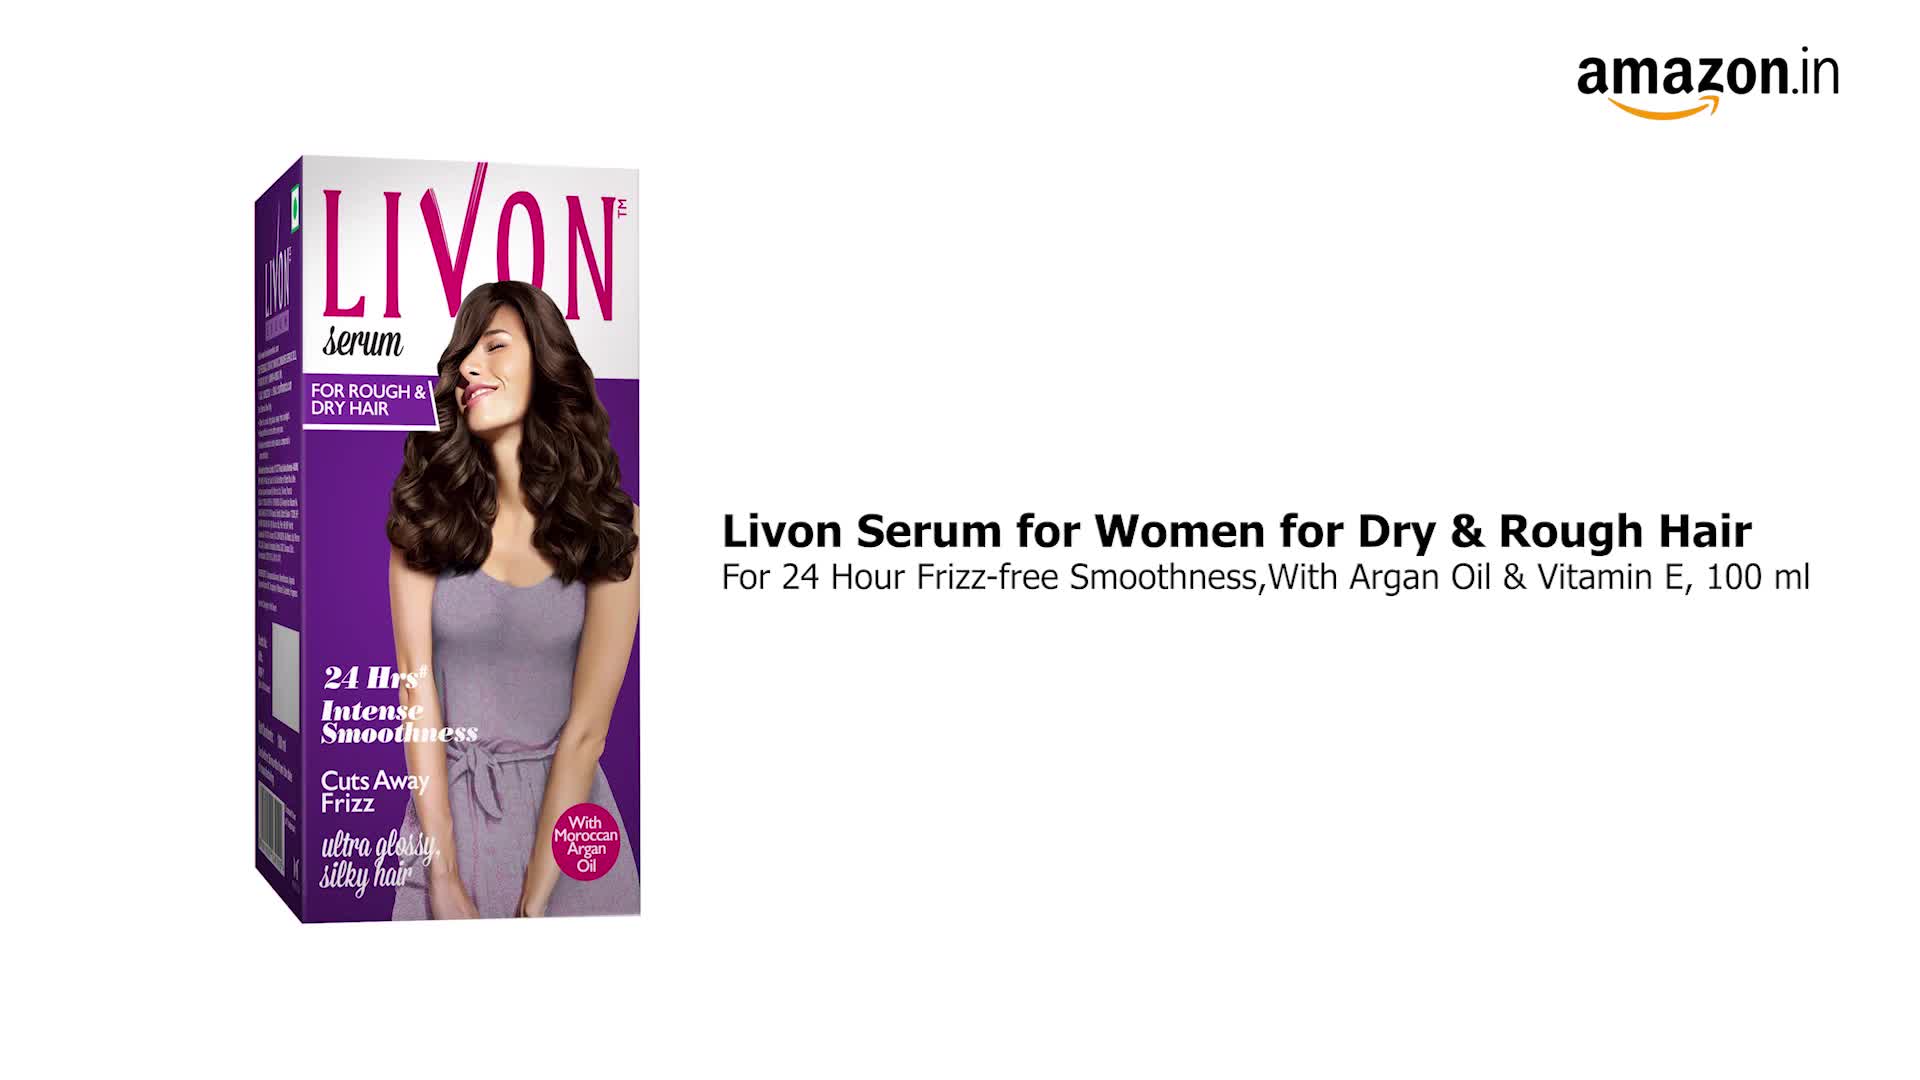 Livon Hair Serum for Women & Men for Dry and Rough Hair | 24-hour frizz-free  Smoothness | with Moroccan Argan Oil & Vitamin E | 100 ml - the best price  and delivery | Globally